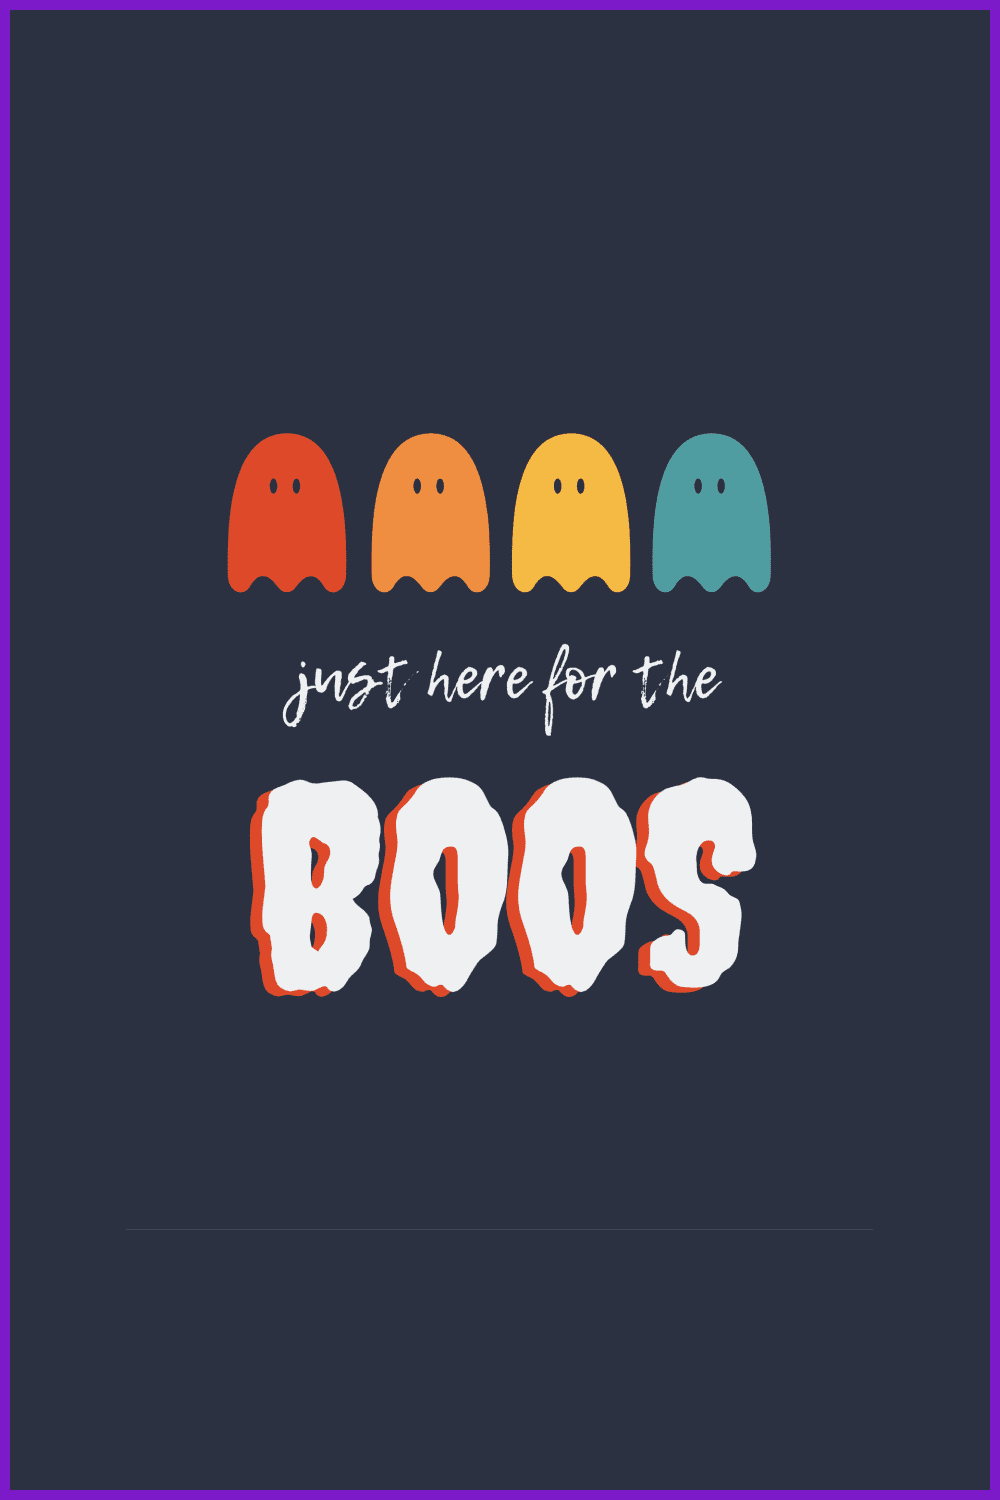 Icons of colored ghosts in pacman style on a gray background.